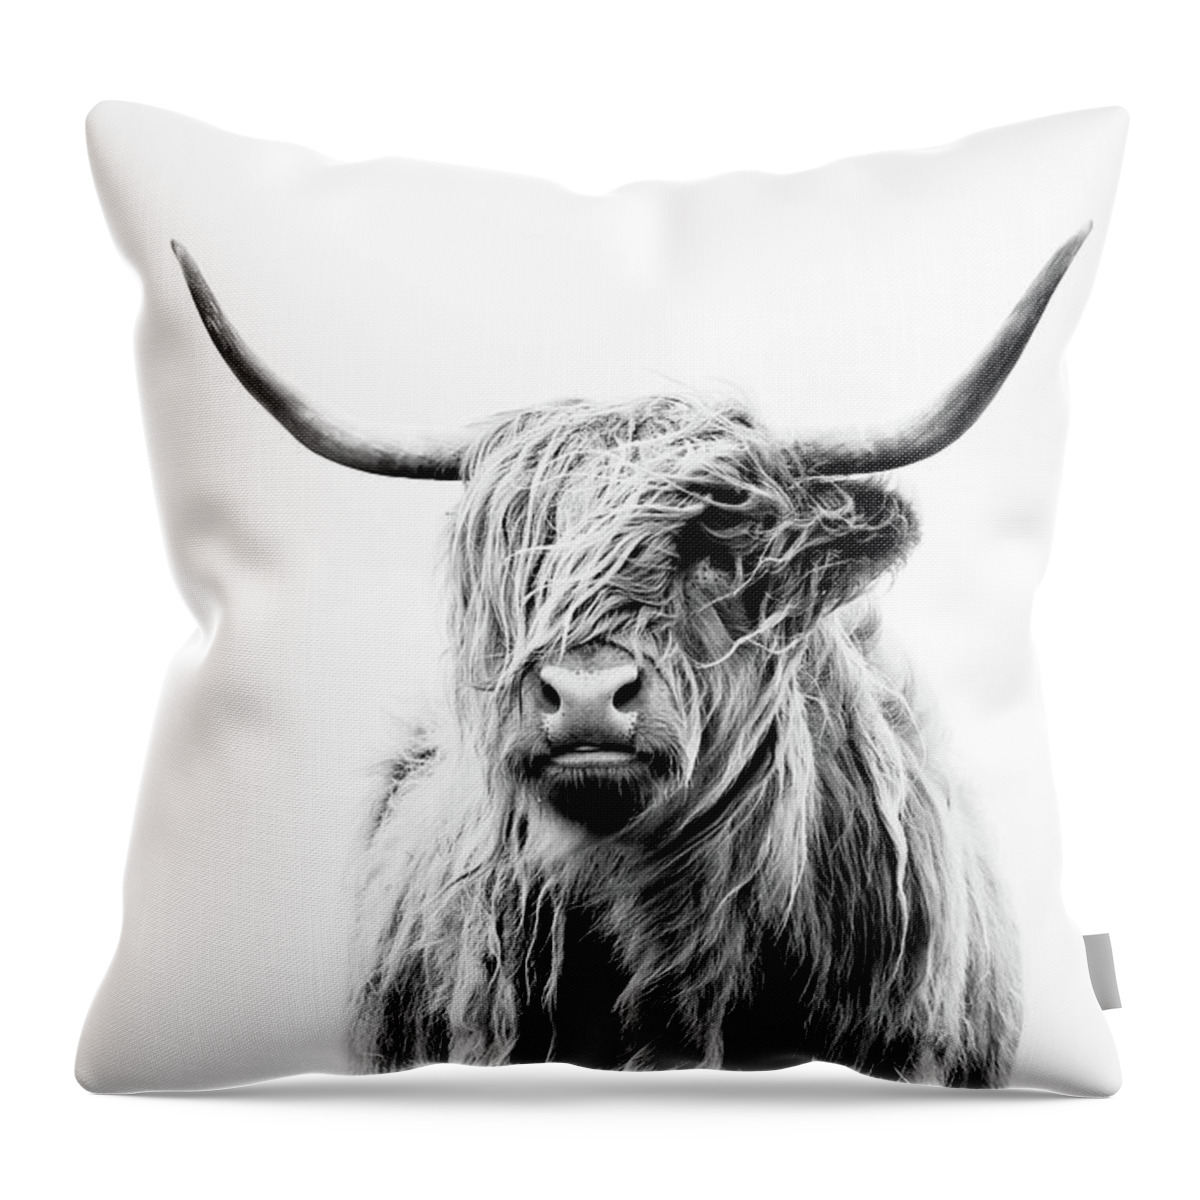 Animals Throw Pillow featuring the photograph Portrait Of A Highland Cow by Dorit Fuhg